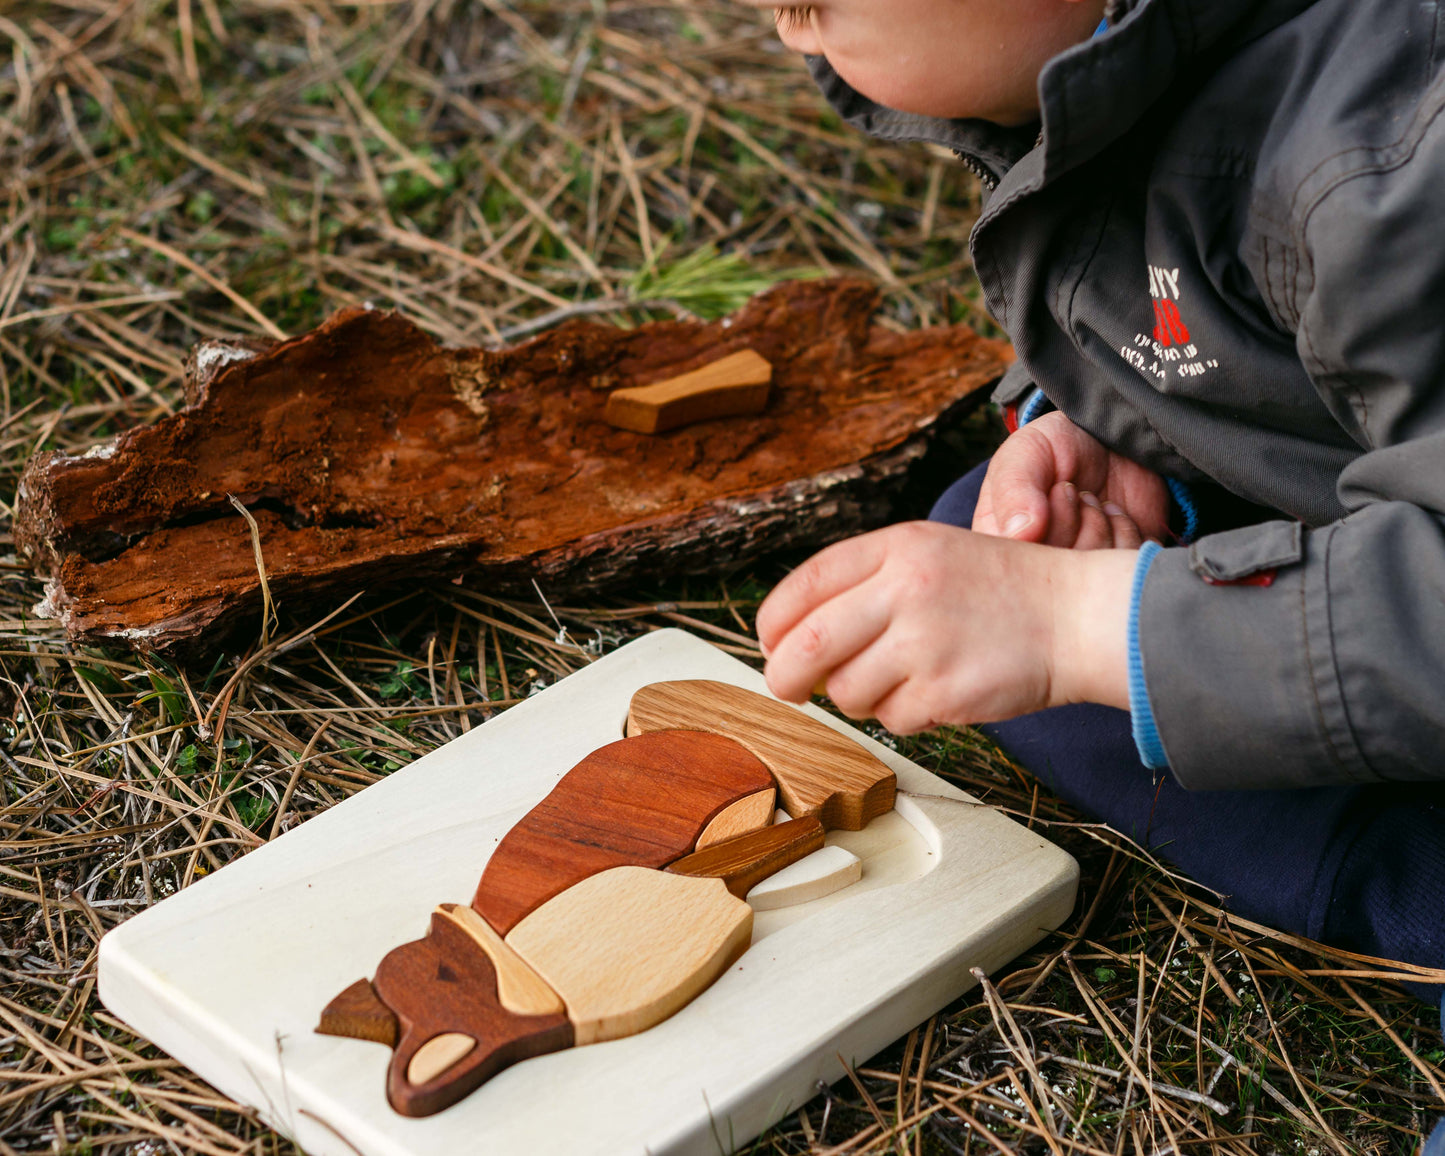 Boy assembling a wooden fox puzzle on the grass